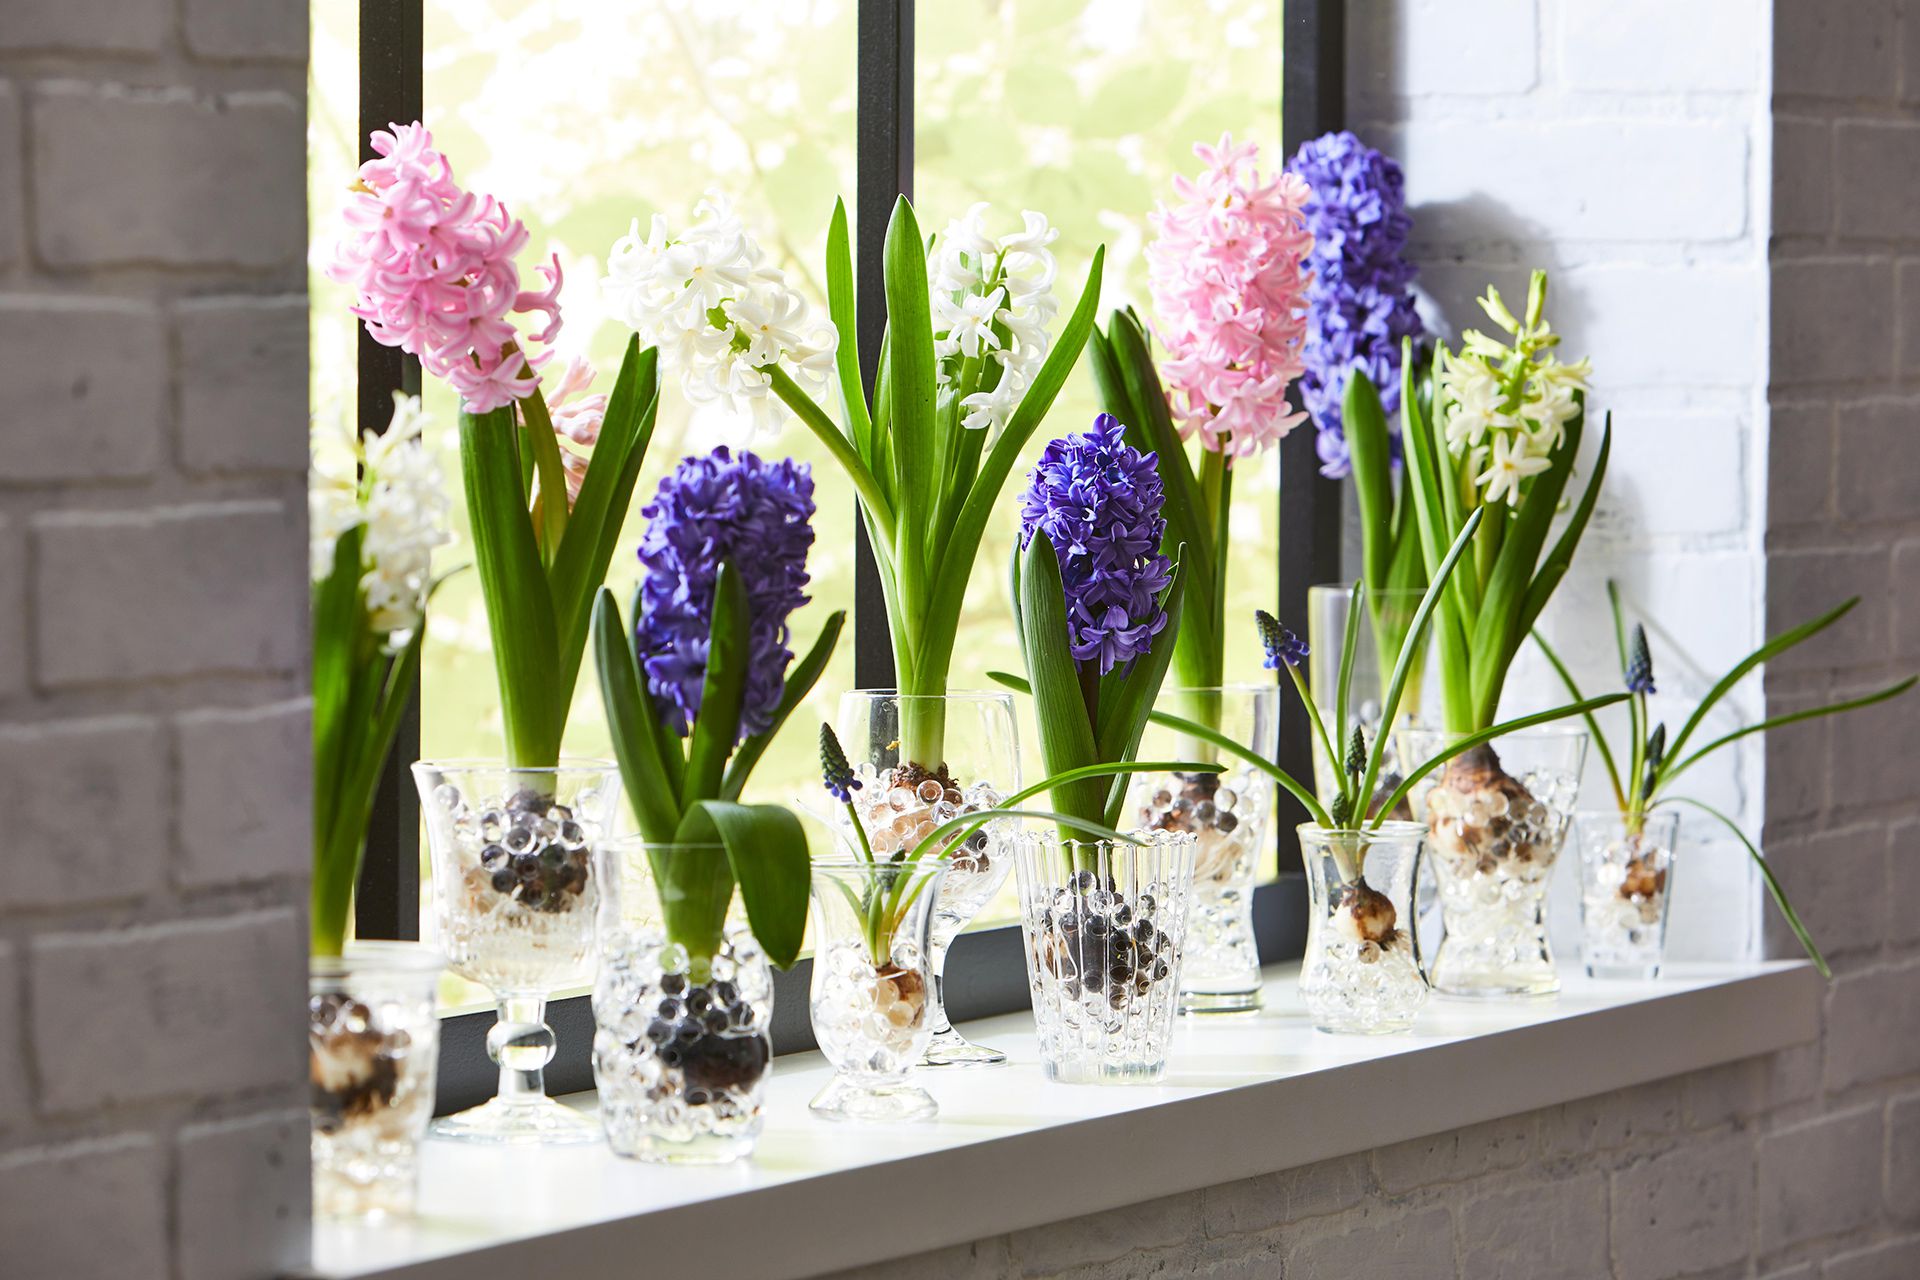 How To Cut Hyacinth For Vase